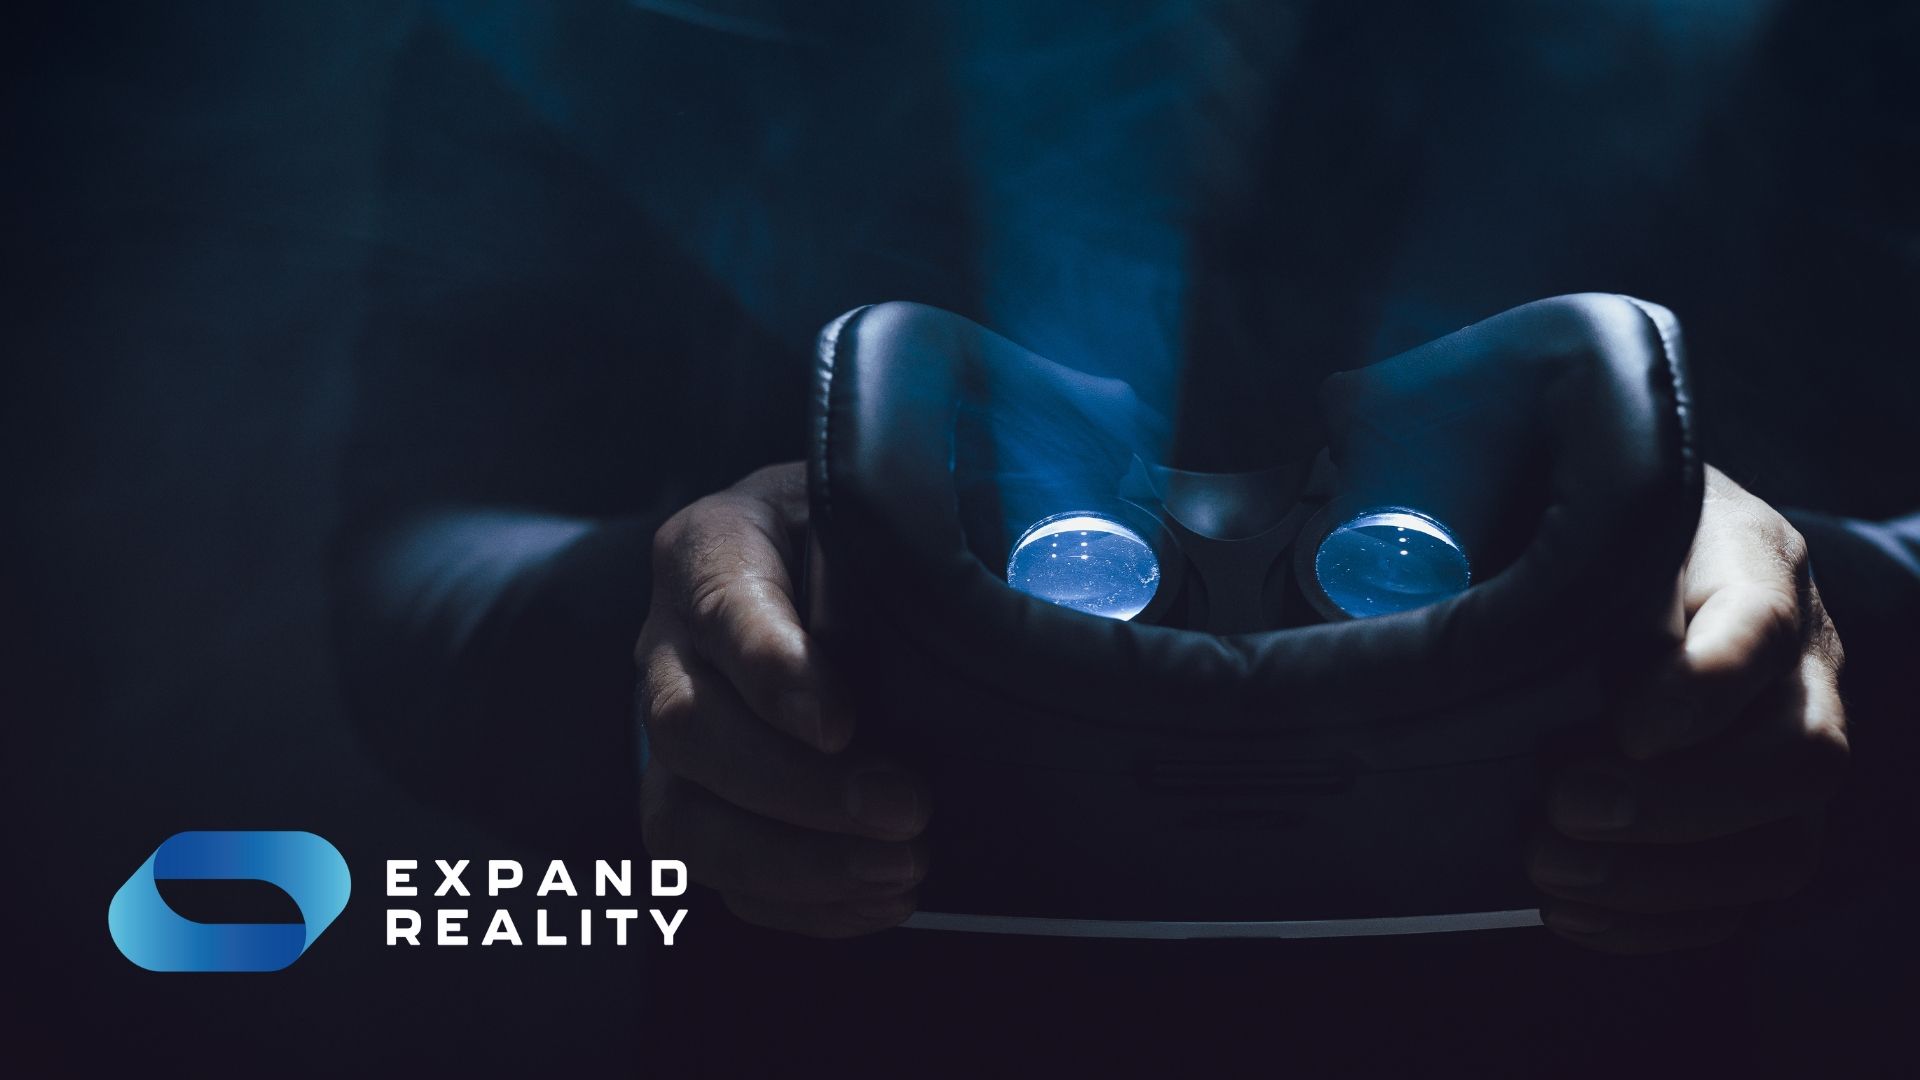 Extended reality (XR) can unlock cost savings and transform the way you do business. But what are the obstacles – and how can you overcome them?
